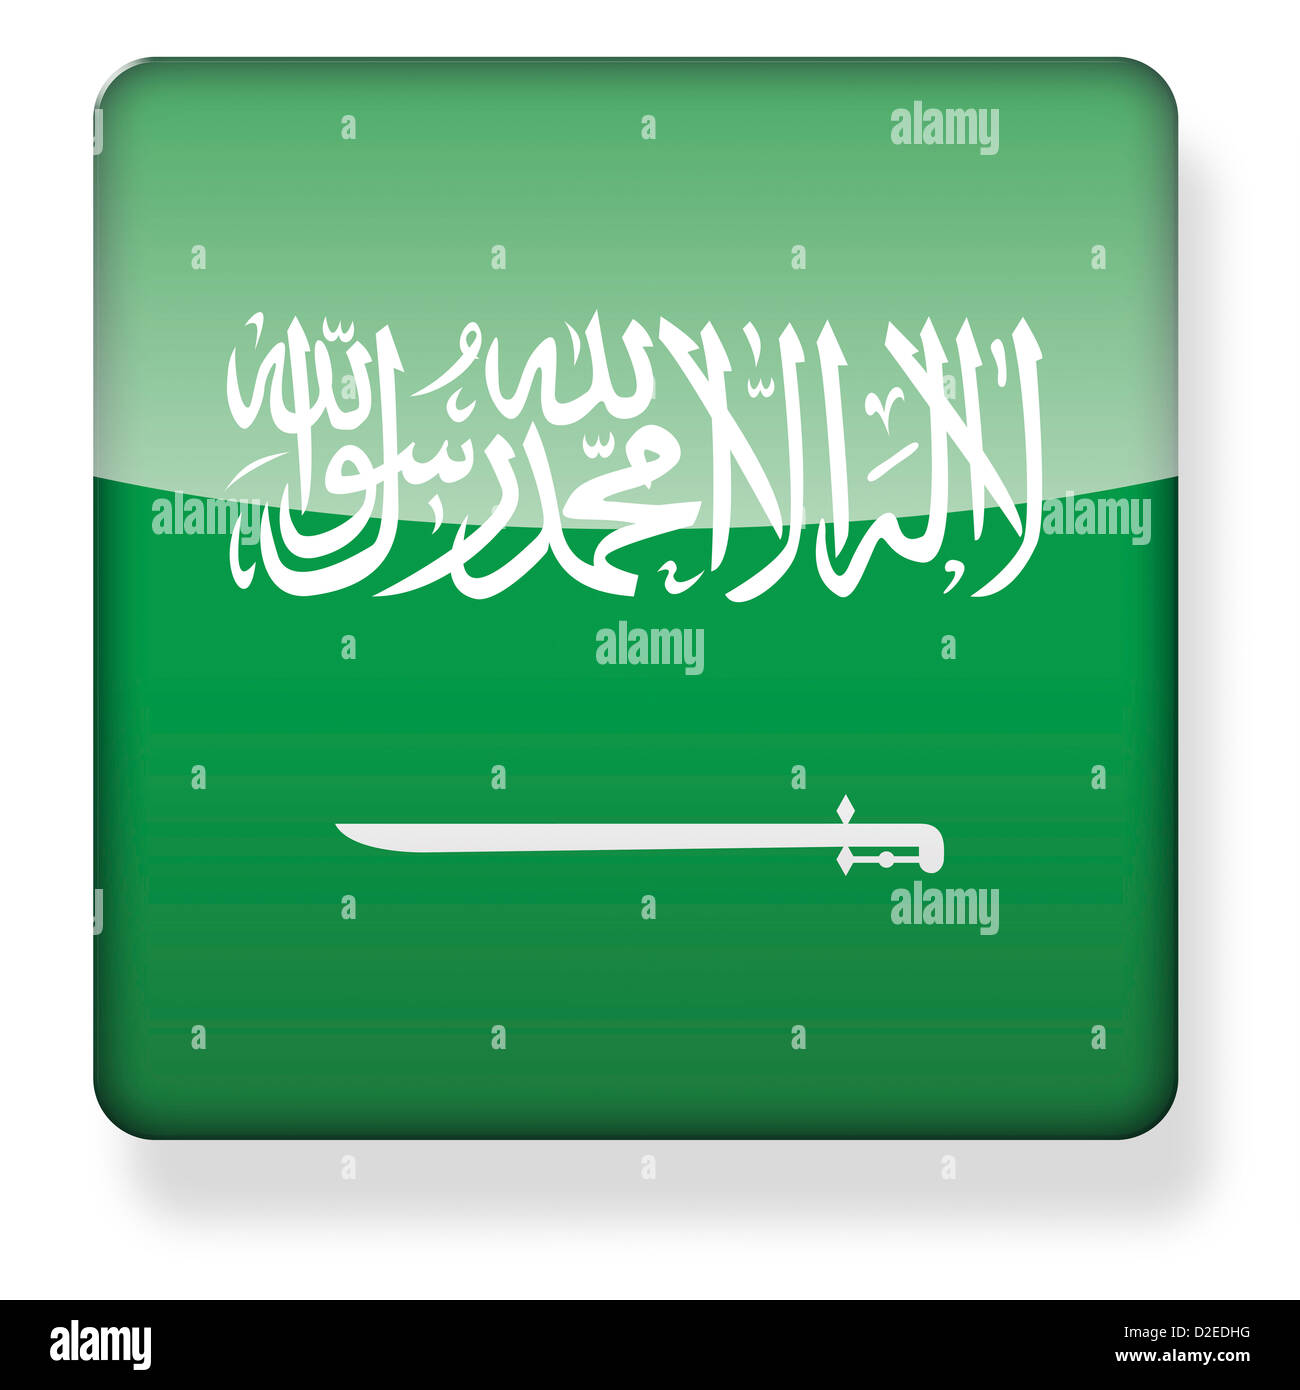 Saudi Arabia flag as an app icon. Clipping path included. Stock Photo